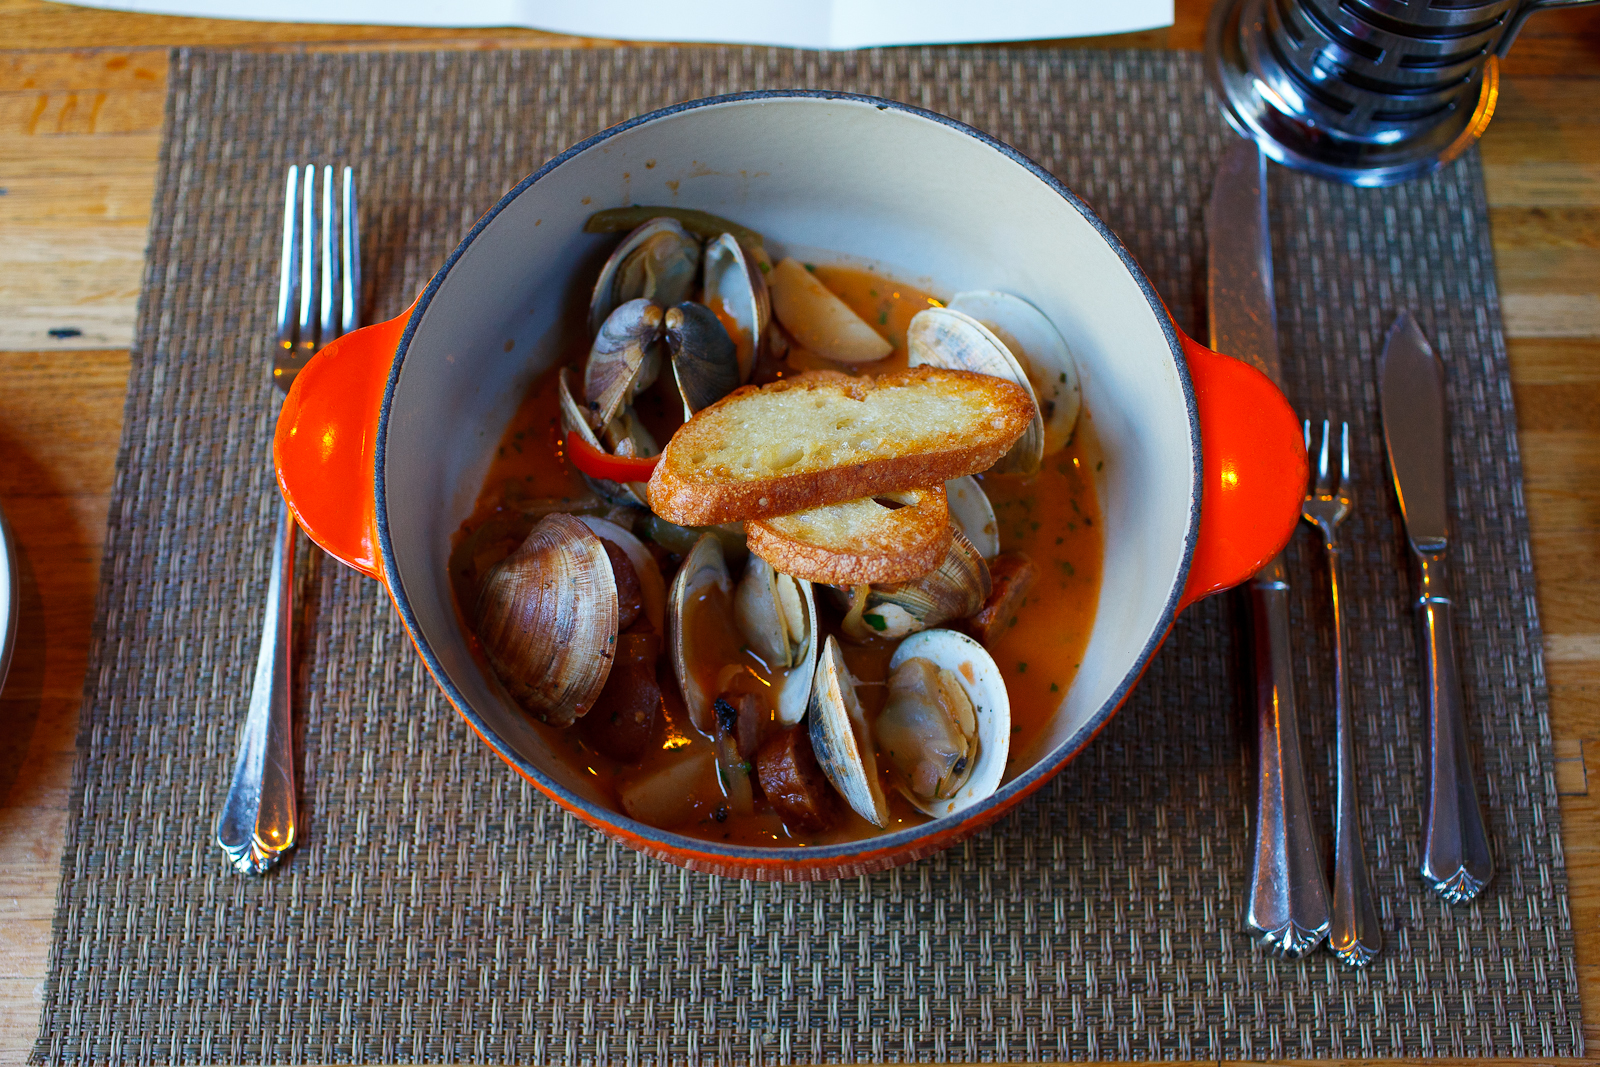 Dave's clams with peppers and onions, tomato broth, potatoes, and Surry sausage ($14)